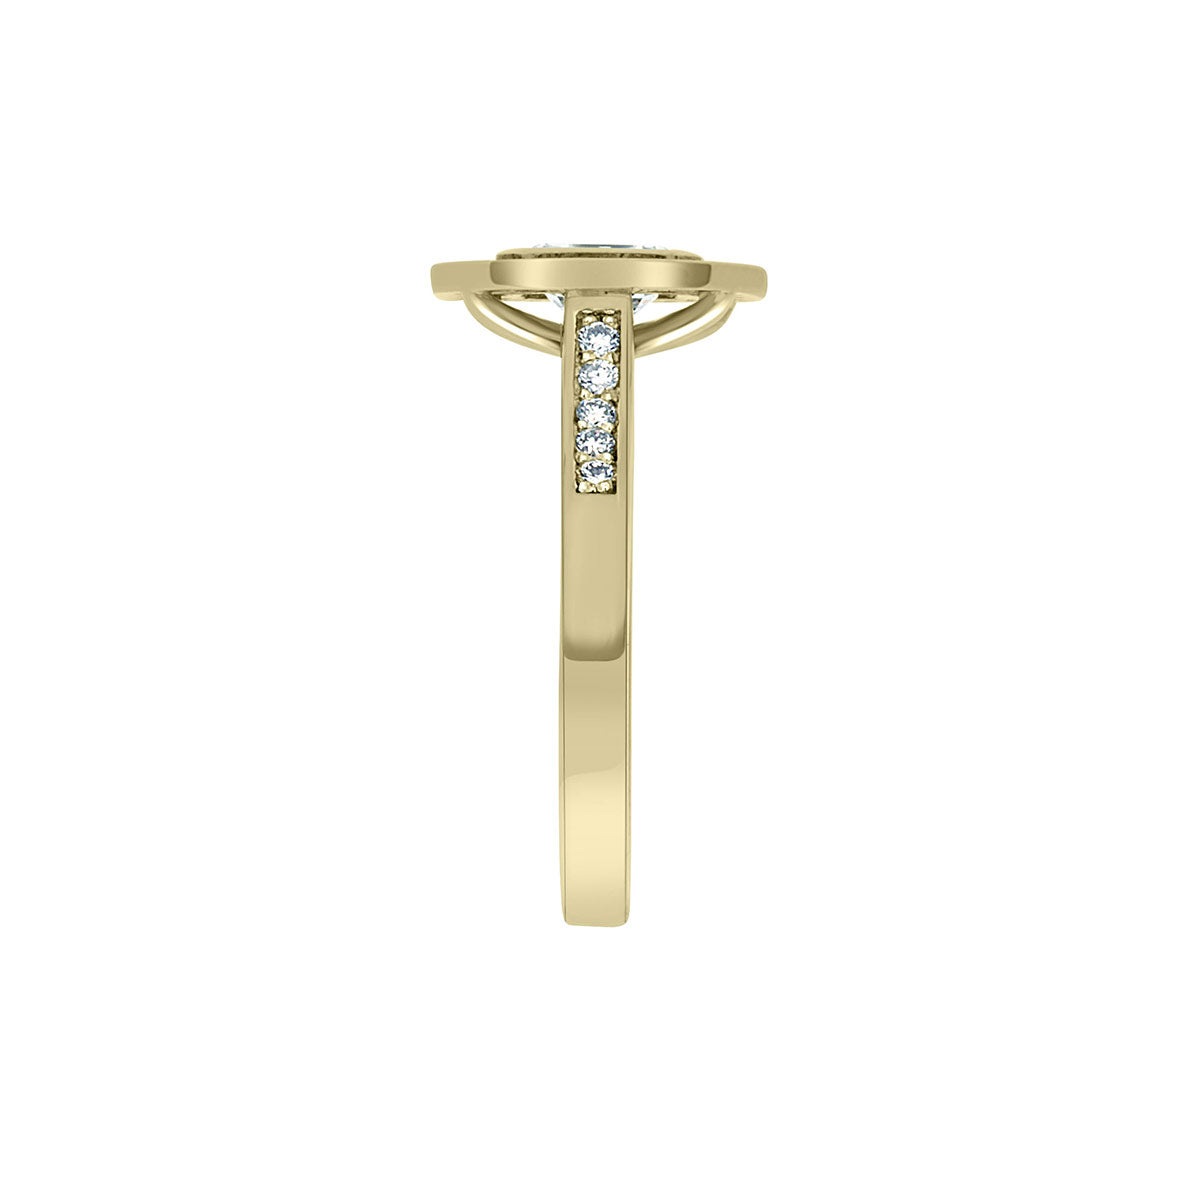 Emerald Cut Halo Ring in yellow gold in an upright position from a side view